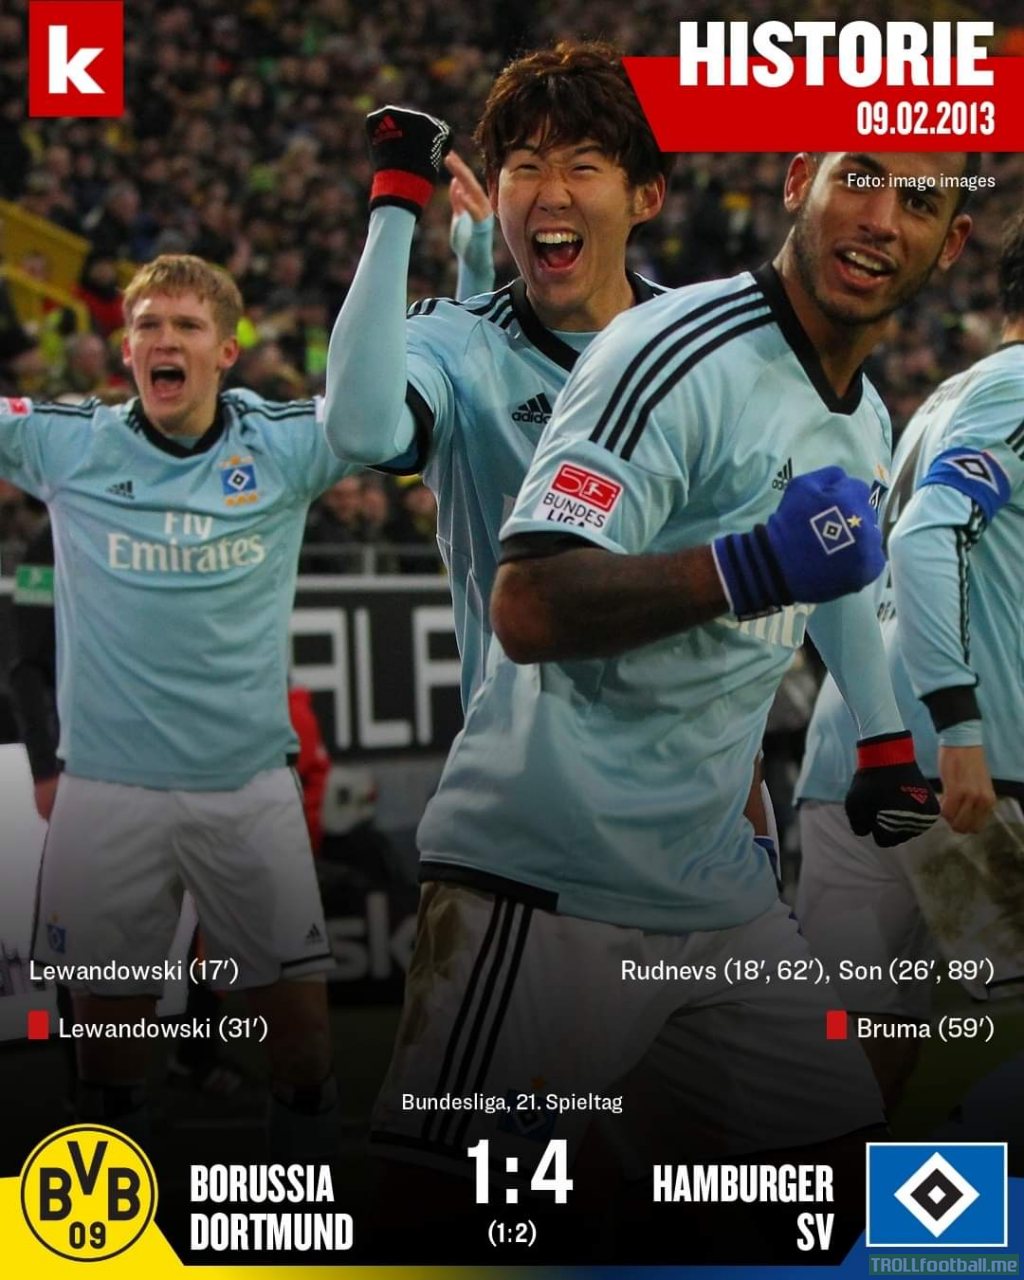 5 goals, 2 red cards, 1 away win. Ten years ago today Hamburger SV achieved a dramatic win against defending German champions Borussia Dortmund on matchday 21 of the 2012/13 season. Lewandowski and Son Heung-min were among the goalscorers (Video Highlights in the comments.)